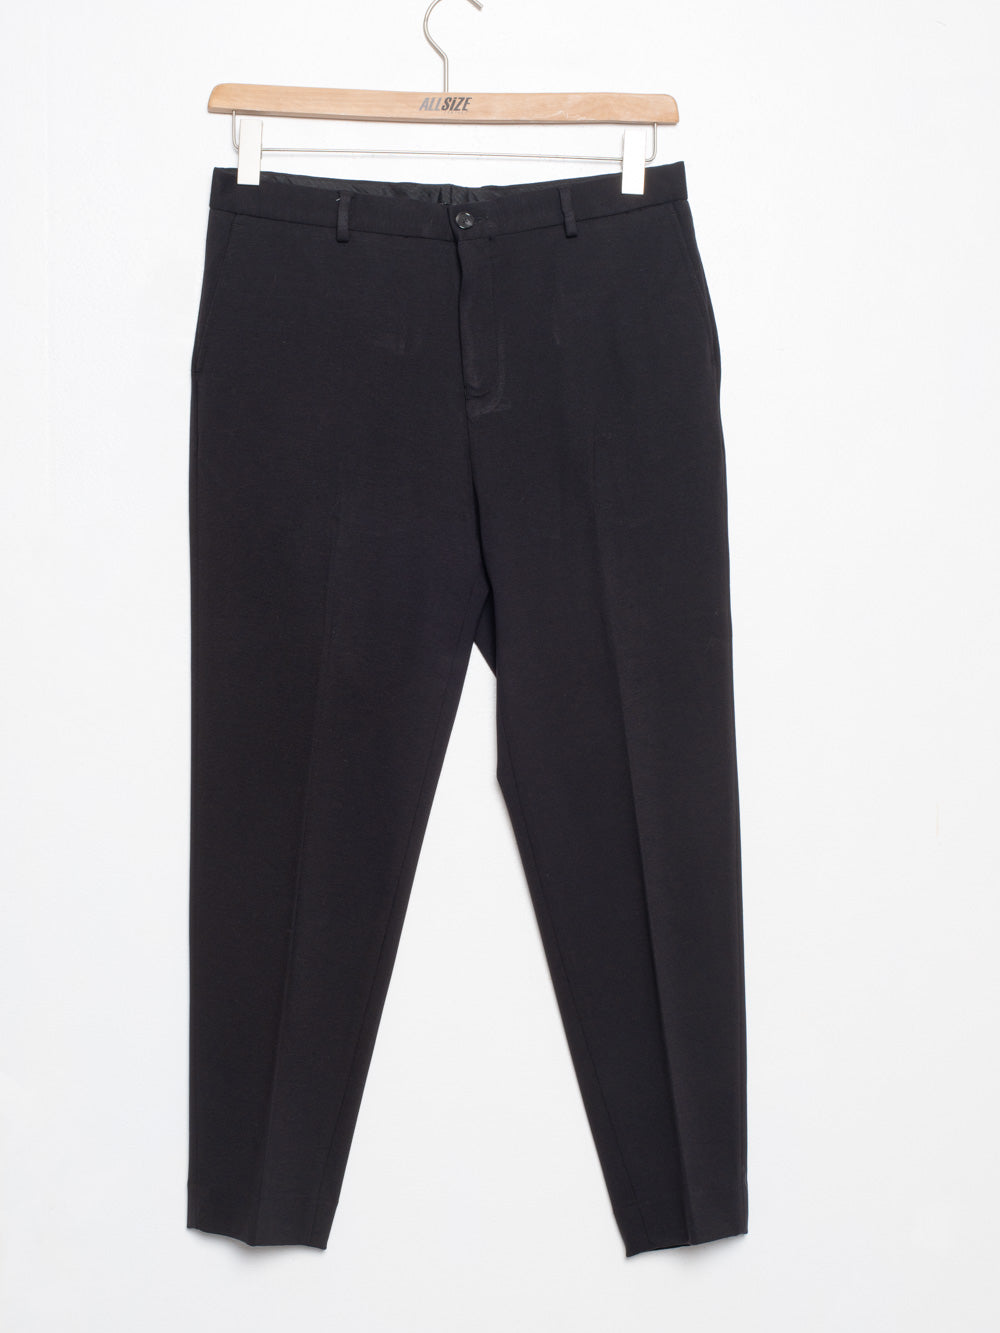 Complete trousers in Milan stitch